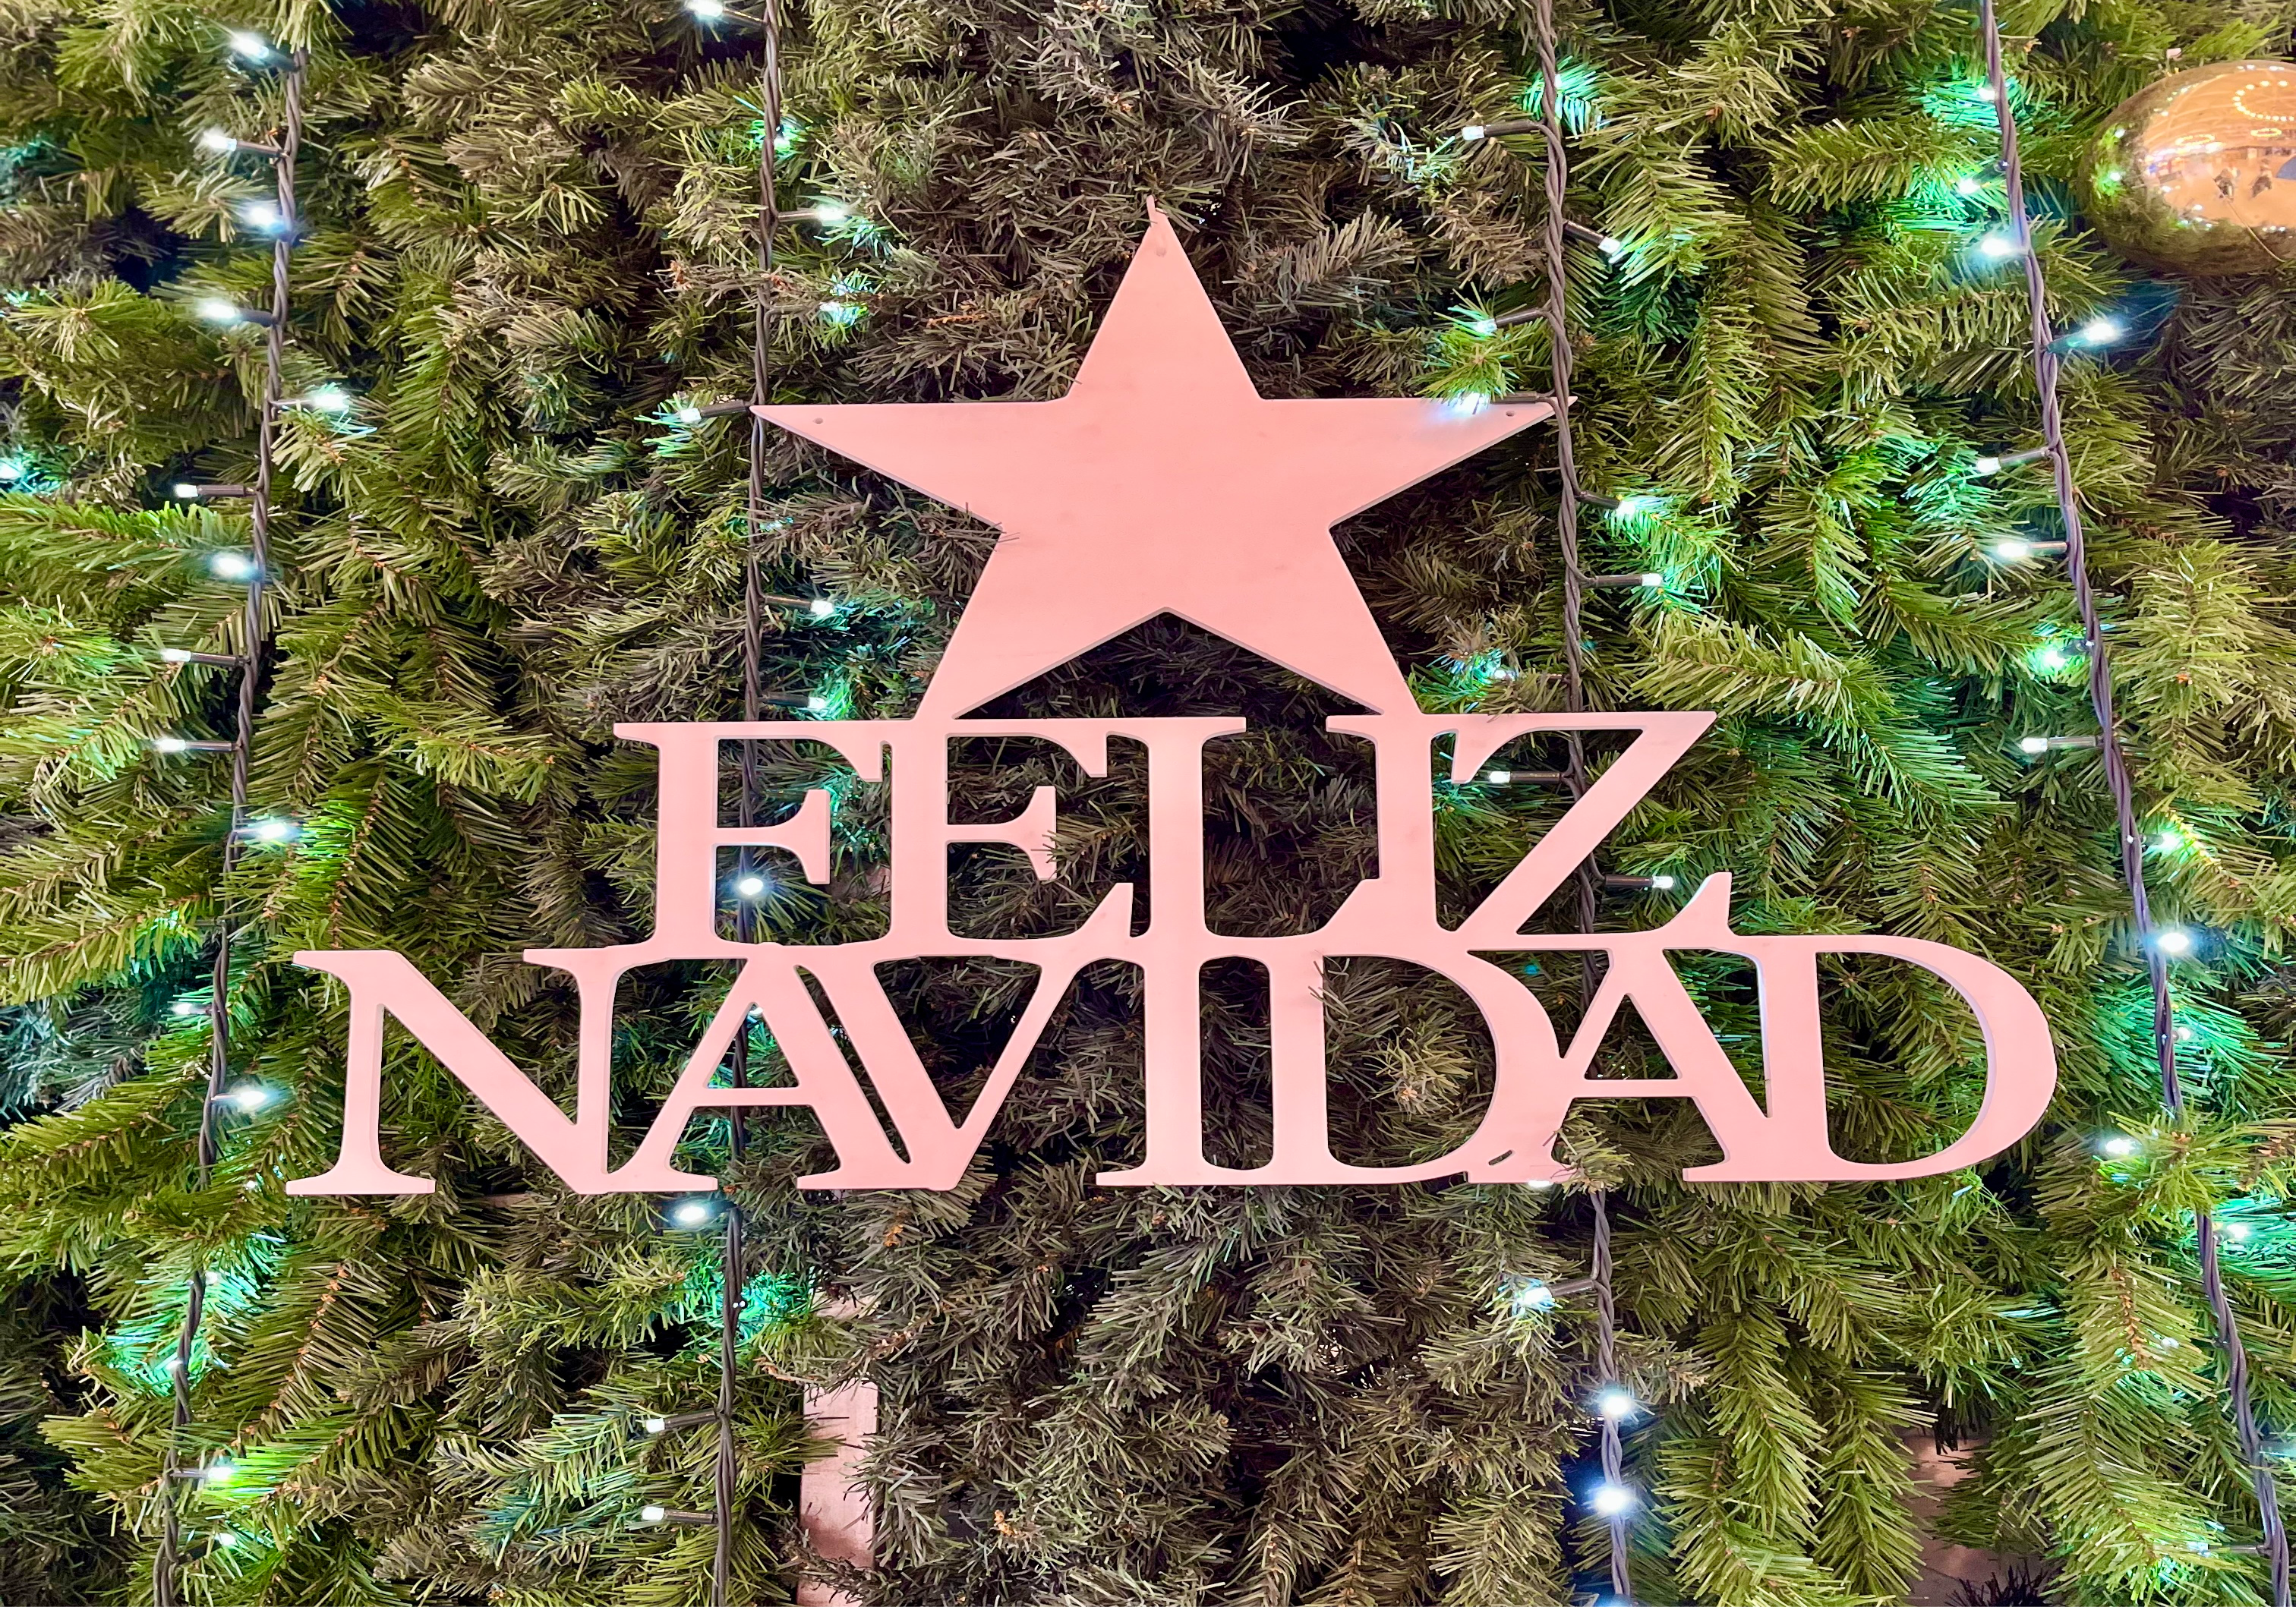 What to do at Christmas in Granada